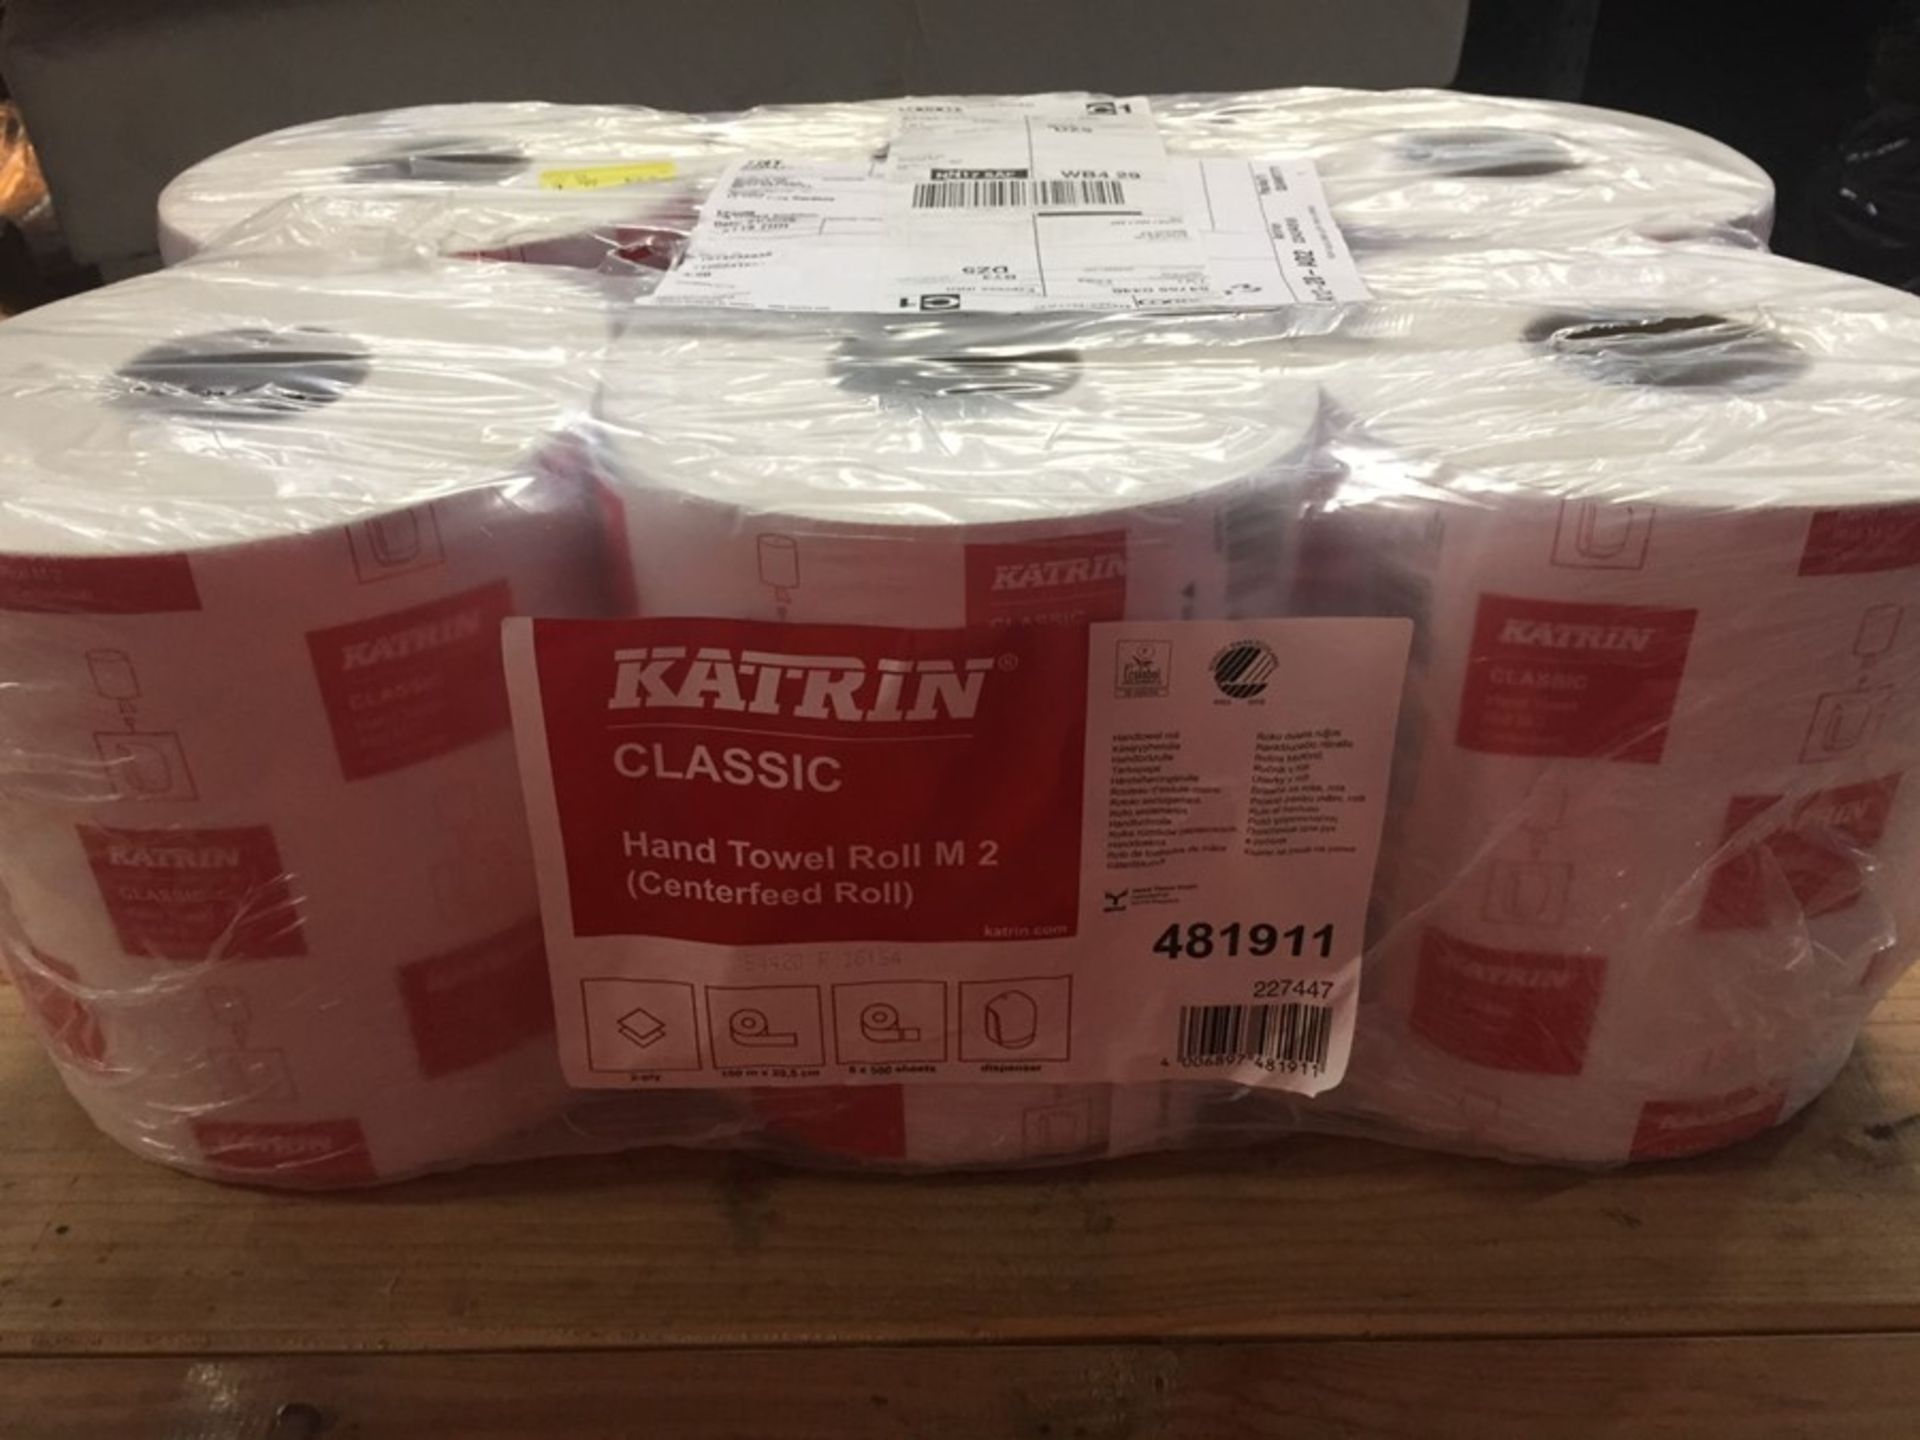 1 LOT TO CONTAIN A PACK OF 6 ROLLS OF KATRIN CLASSIC HAND TOWEL ROLL M 2 -L7